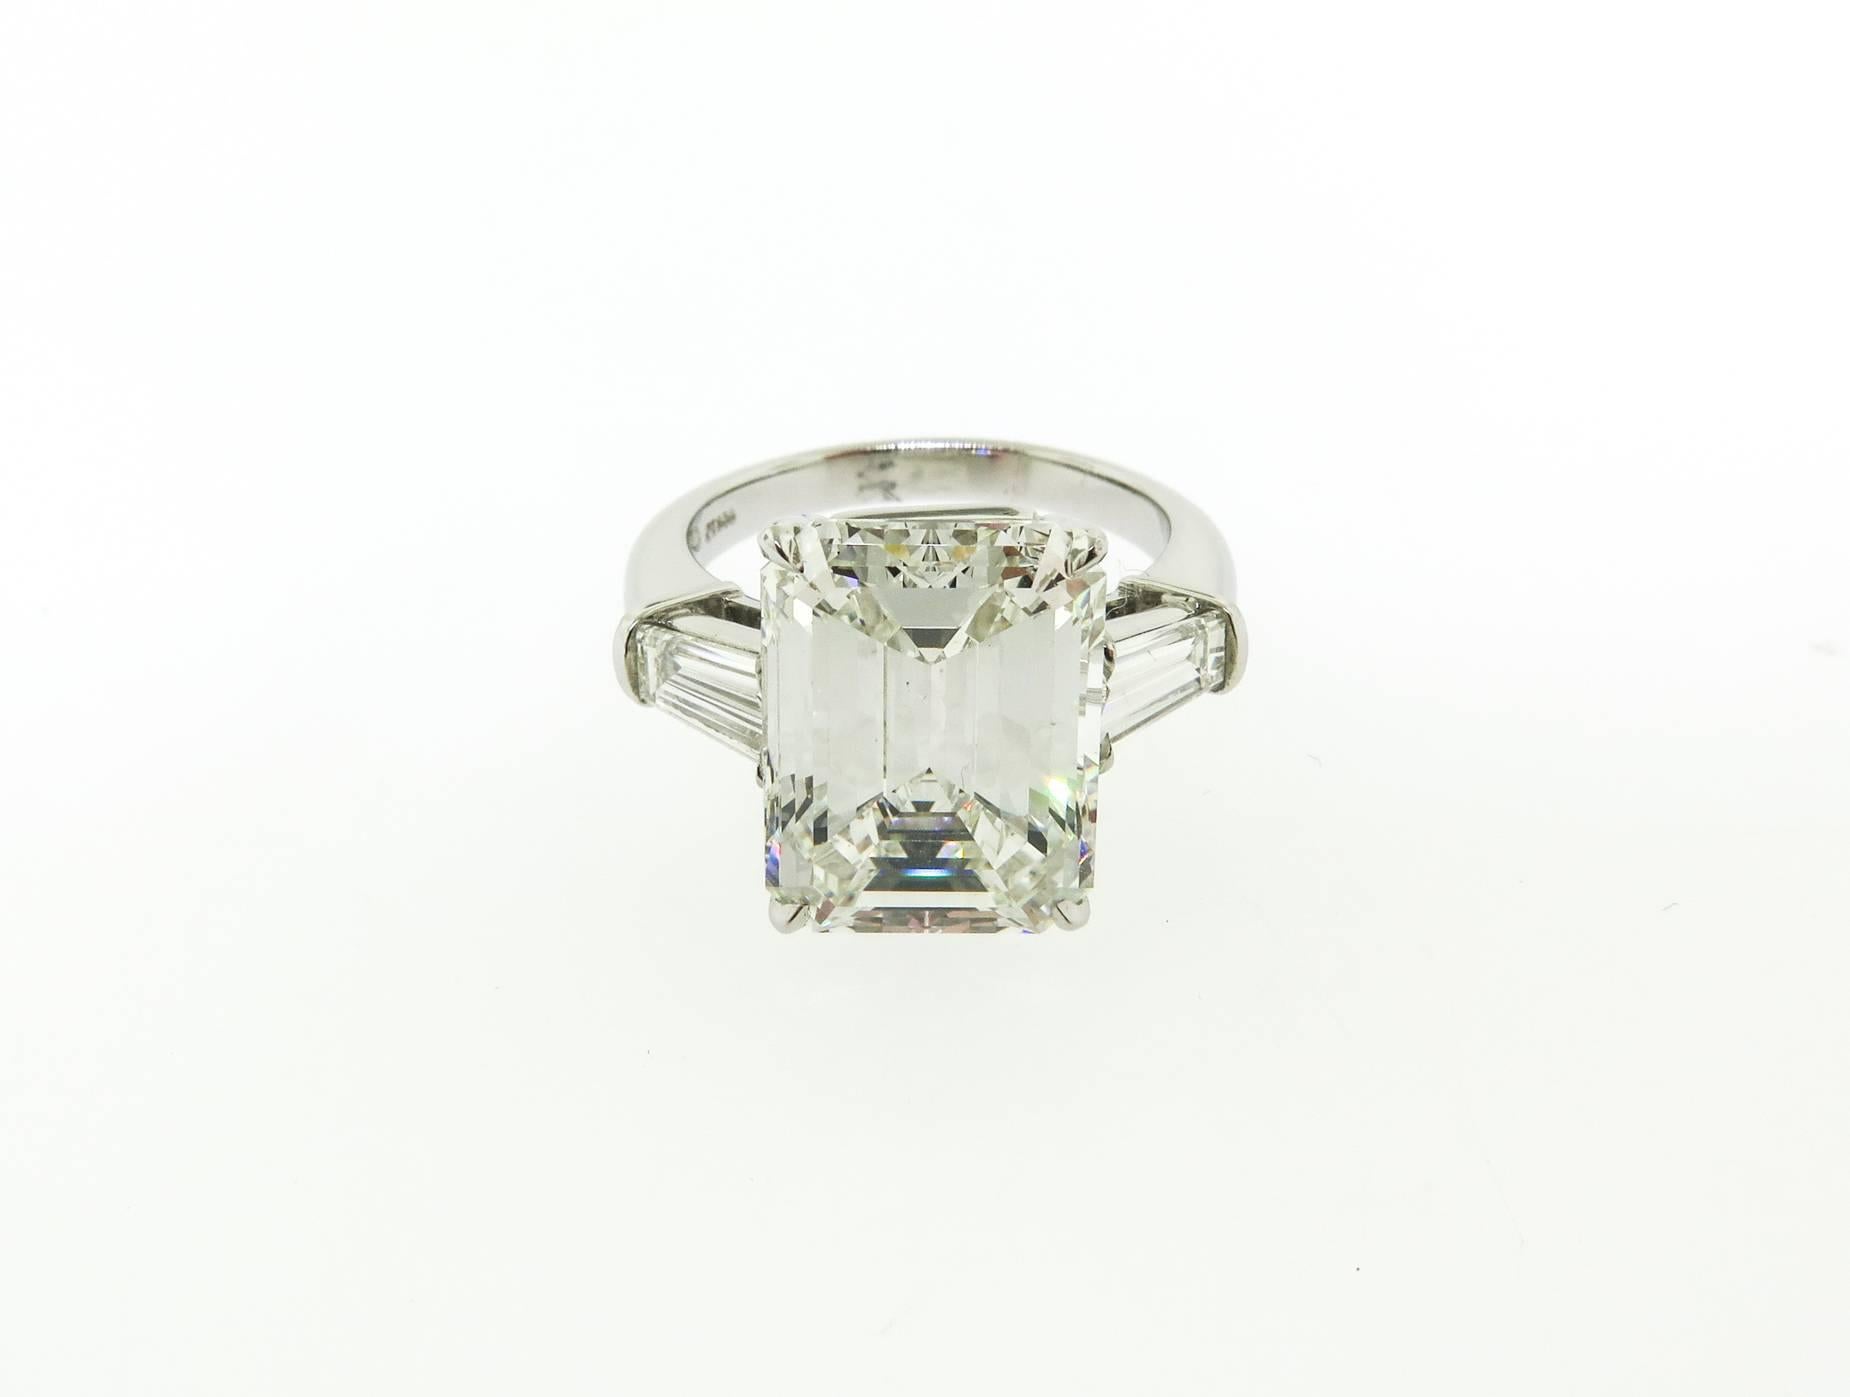 This gorgeous handmade platinum ring features a GIA certified 7.47 ct, I color, VS2 clarity, emerald cut with tapered baguettes. This stunning engagement ring is the perfect choice for your true love!